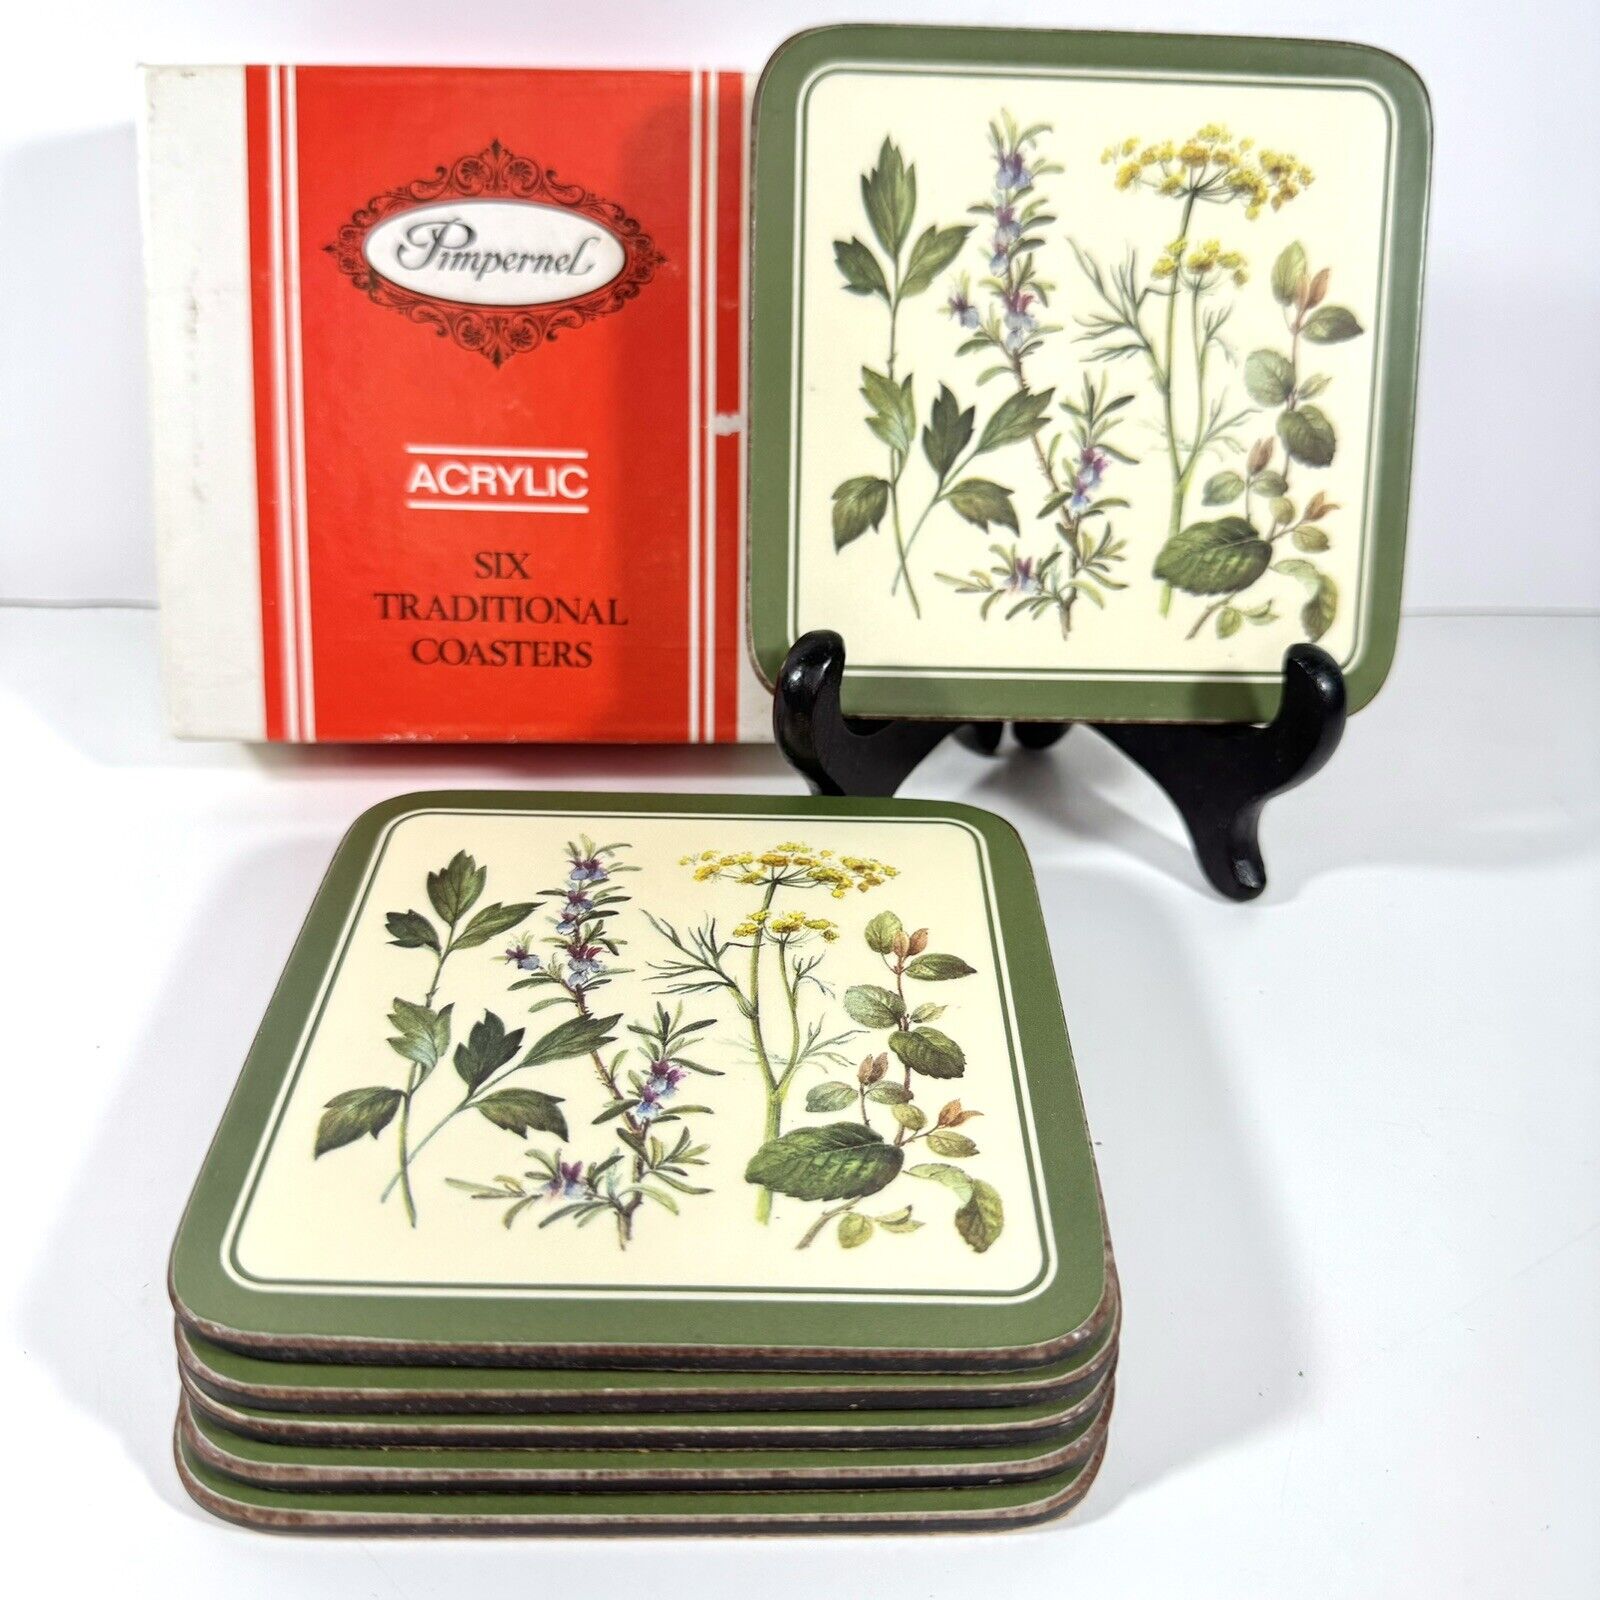 Vintage 6 Pimpernel Acrylic Coasters Herbs 0126051 Cork Backs 4” Square in Box